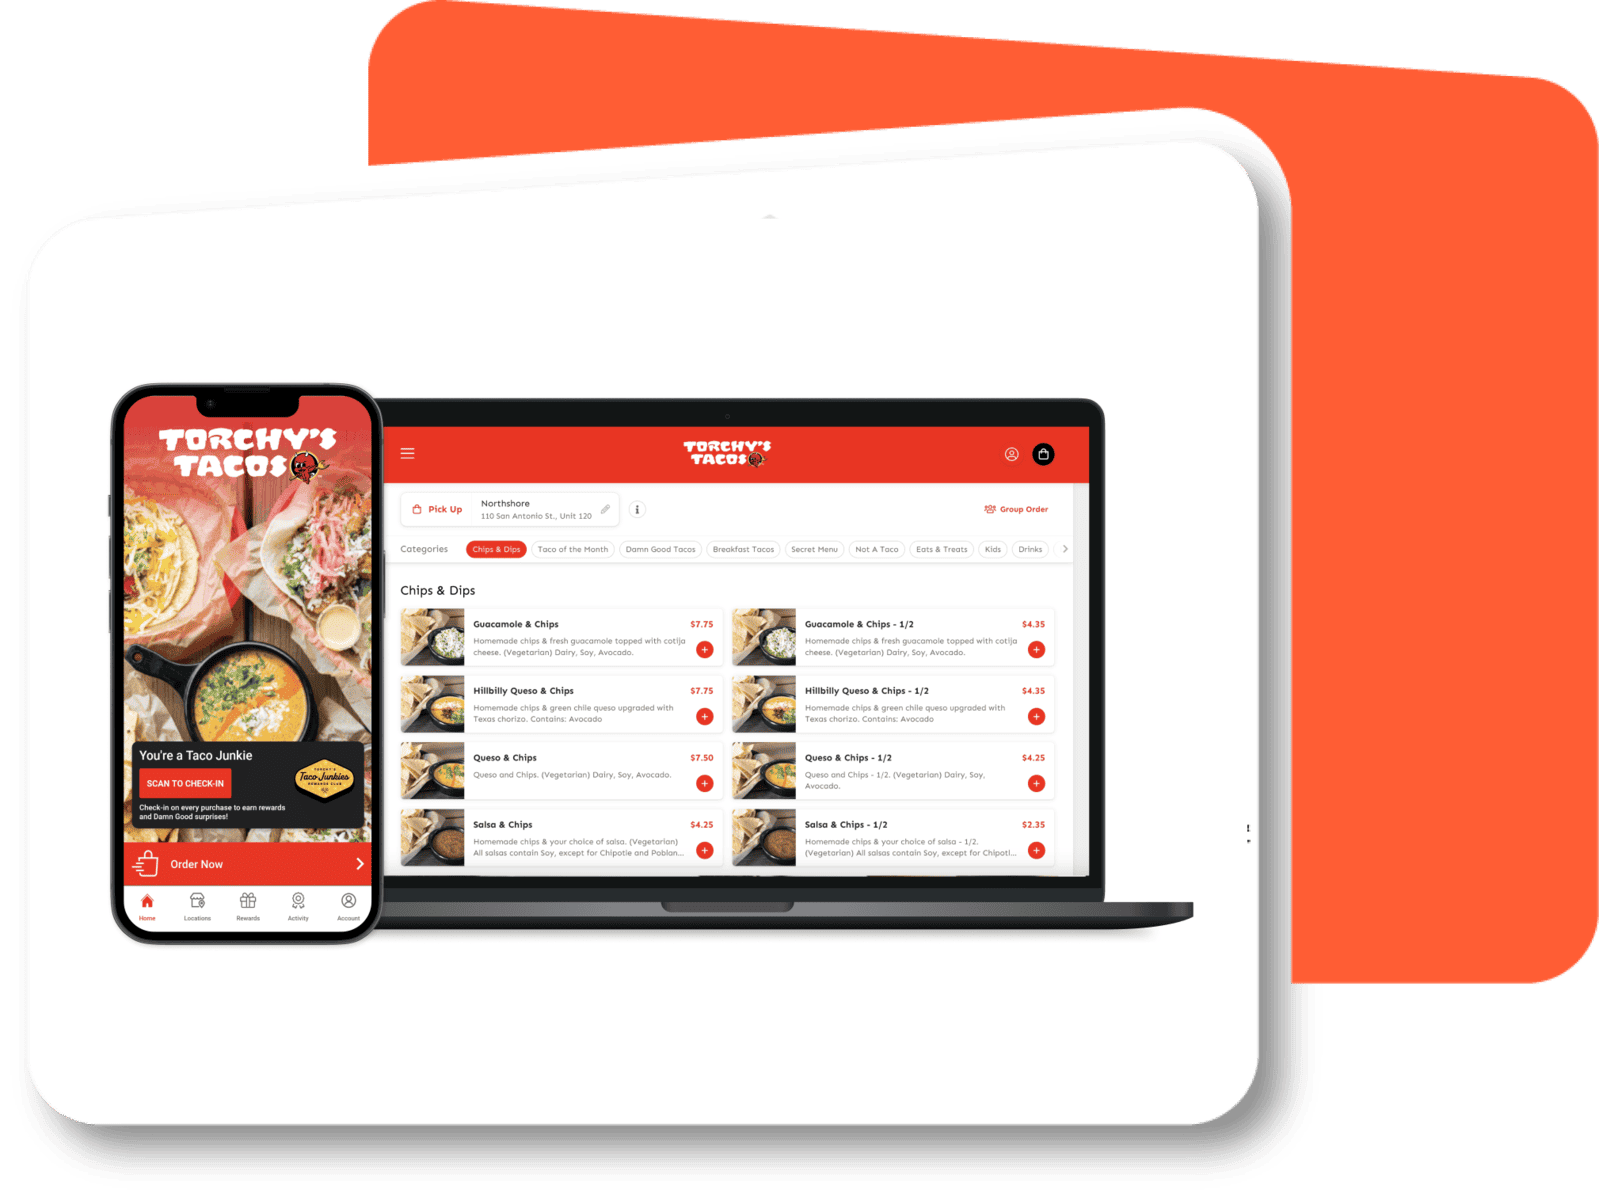 CardFree quick service restaurant order and pay tech